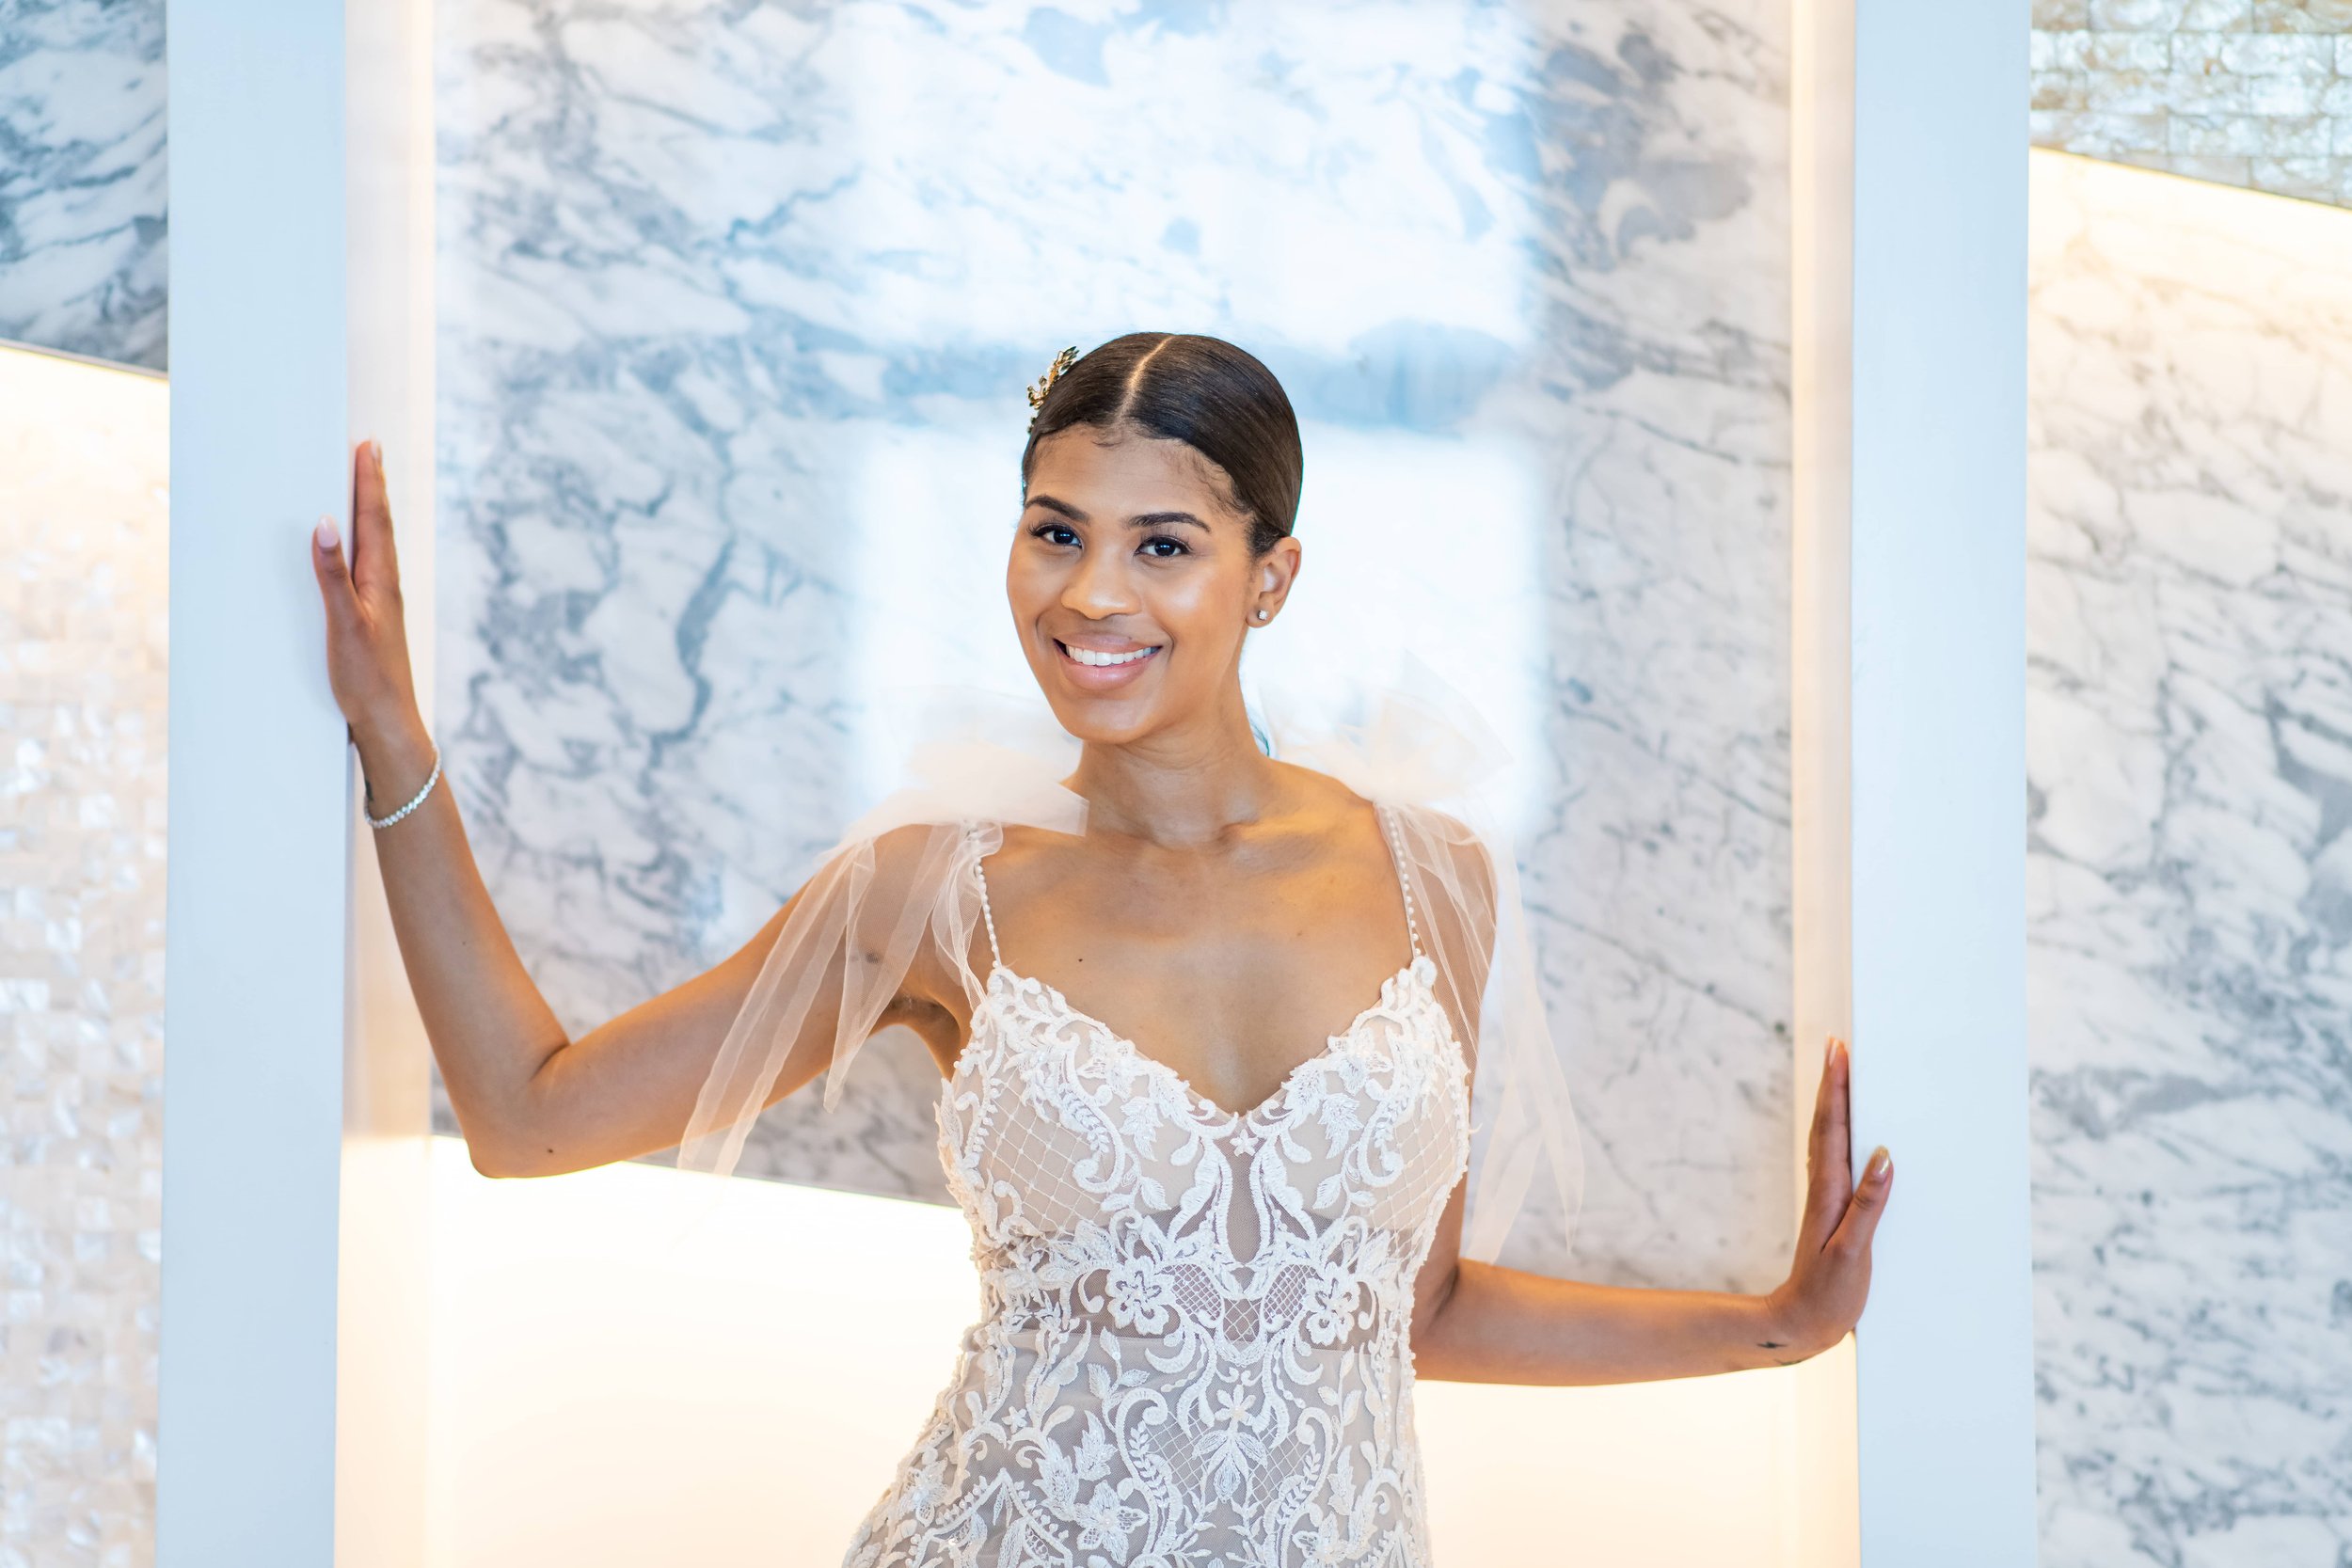  A joyful bride in a lace wedding dress with sheer sleeves poses between white columns with a marble backdrop. she is smiling broadly at the camera. 